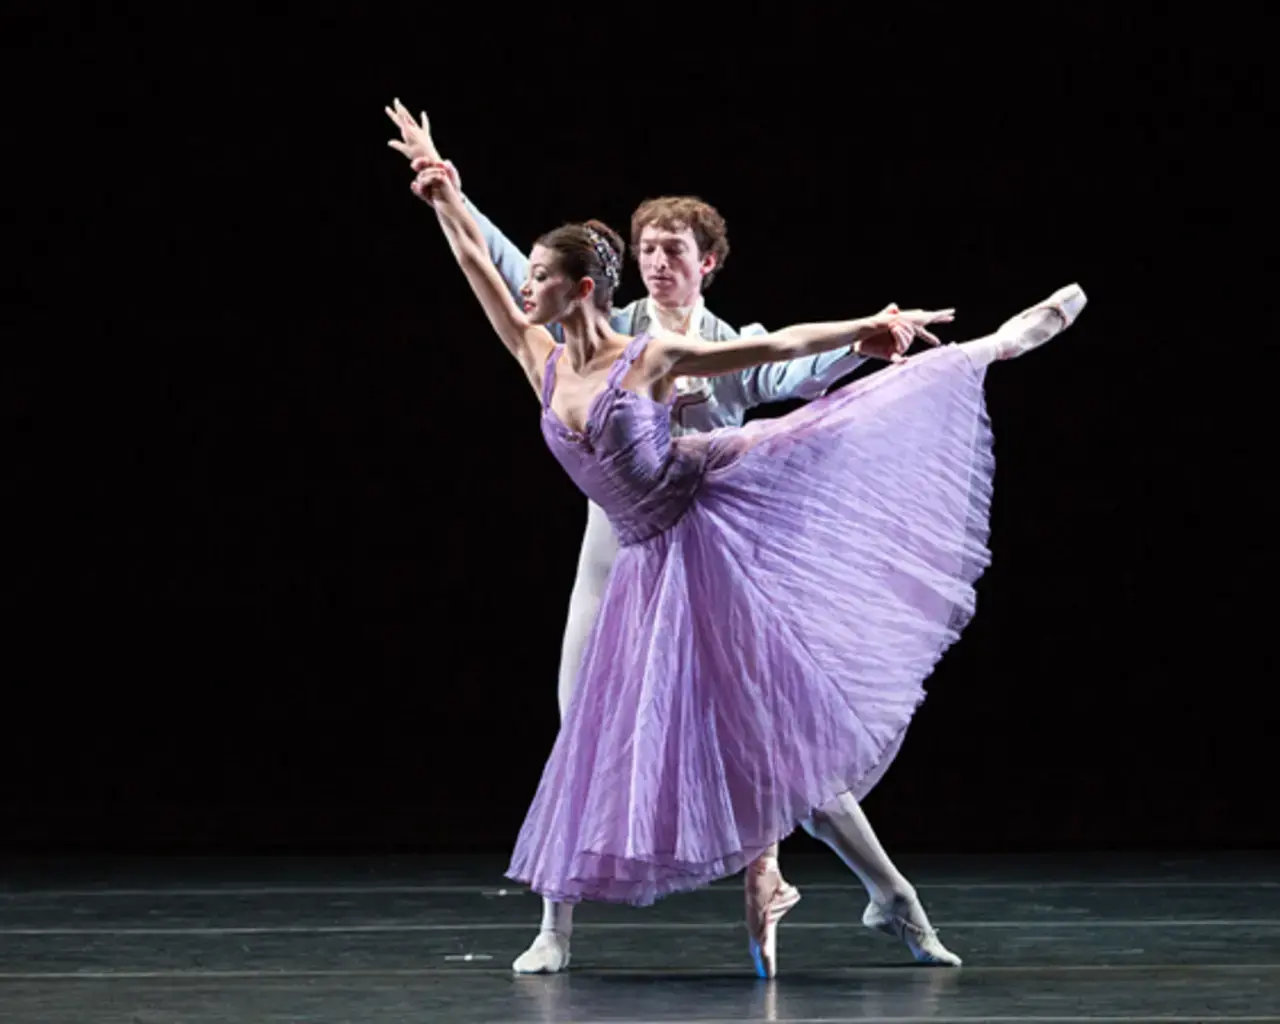 Pennsylvania Ballet soloist Lillian Di Piazza and principal dancer Zachary Hench in Jerome Robbins&rsquo; In the Night. Photo by Alexander Iziliaev.